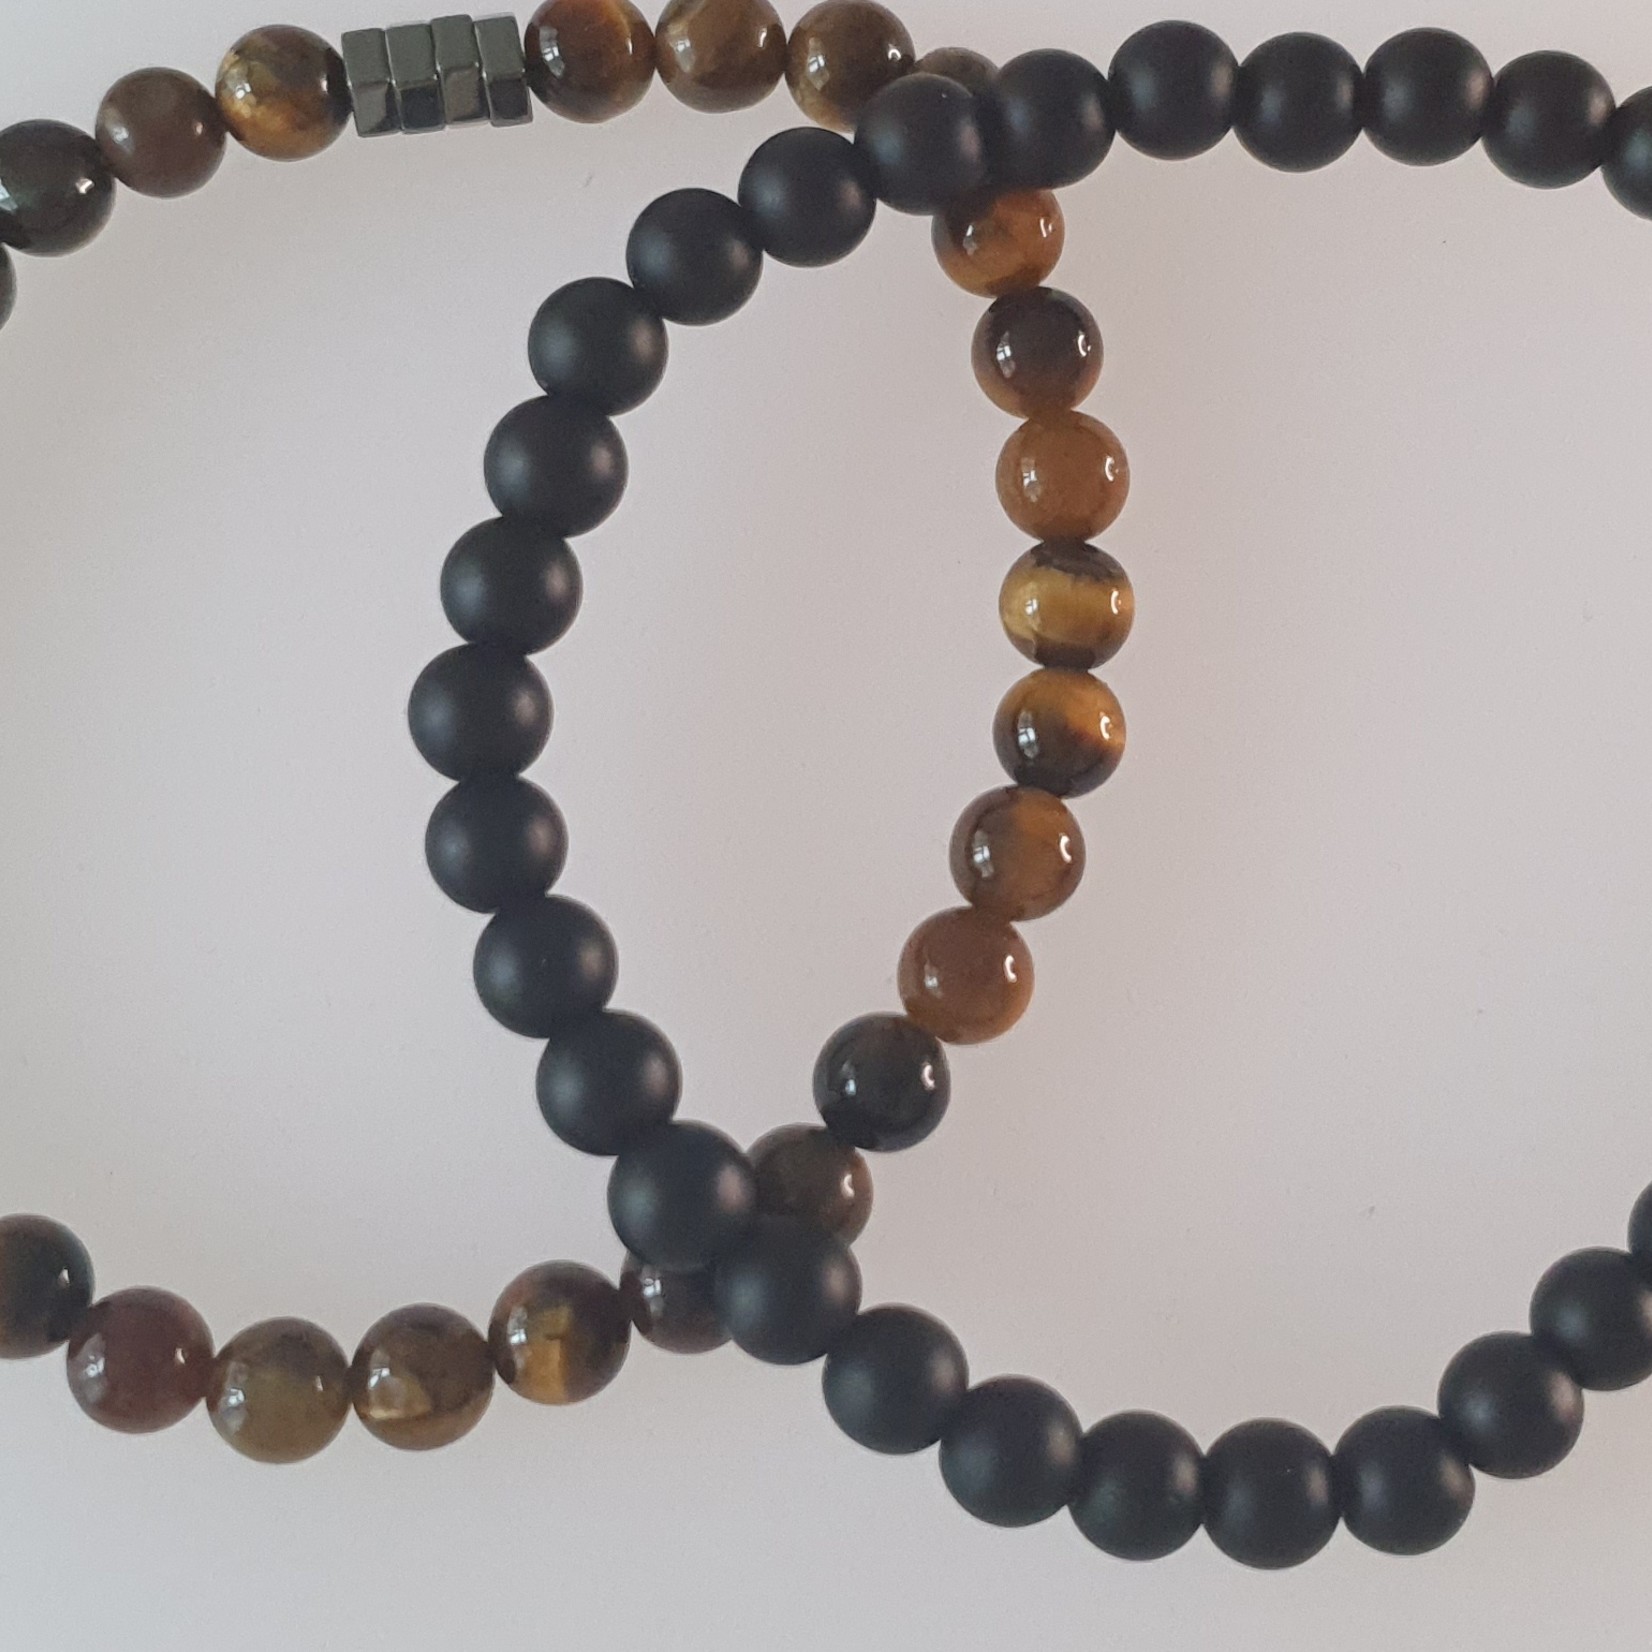 Eve's Gifts 2 beaded bracelets black and brown man XS